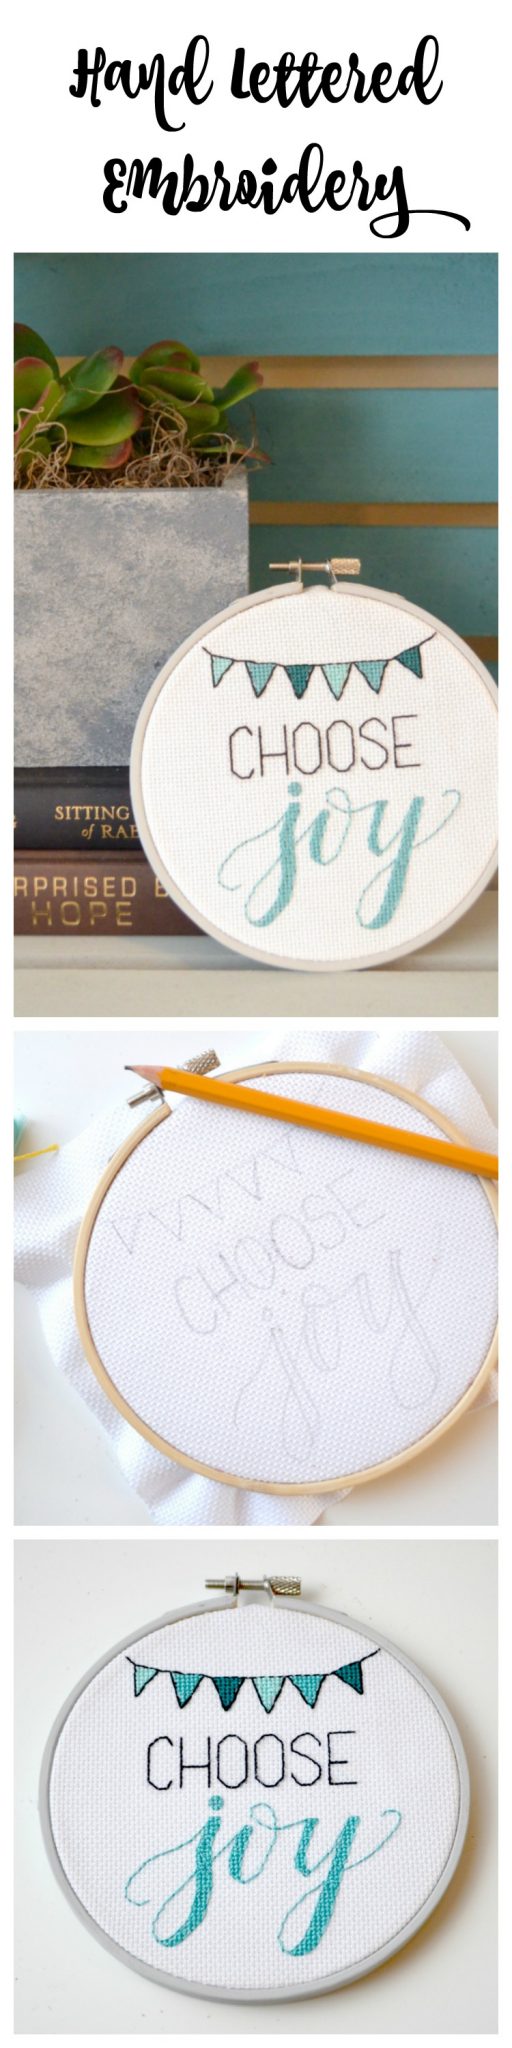 Hand Lettered Embroidery